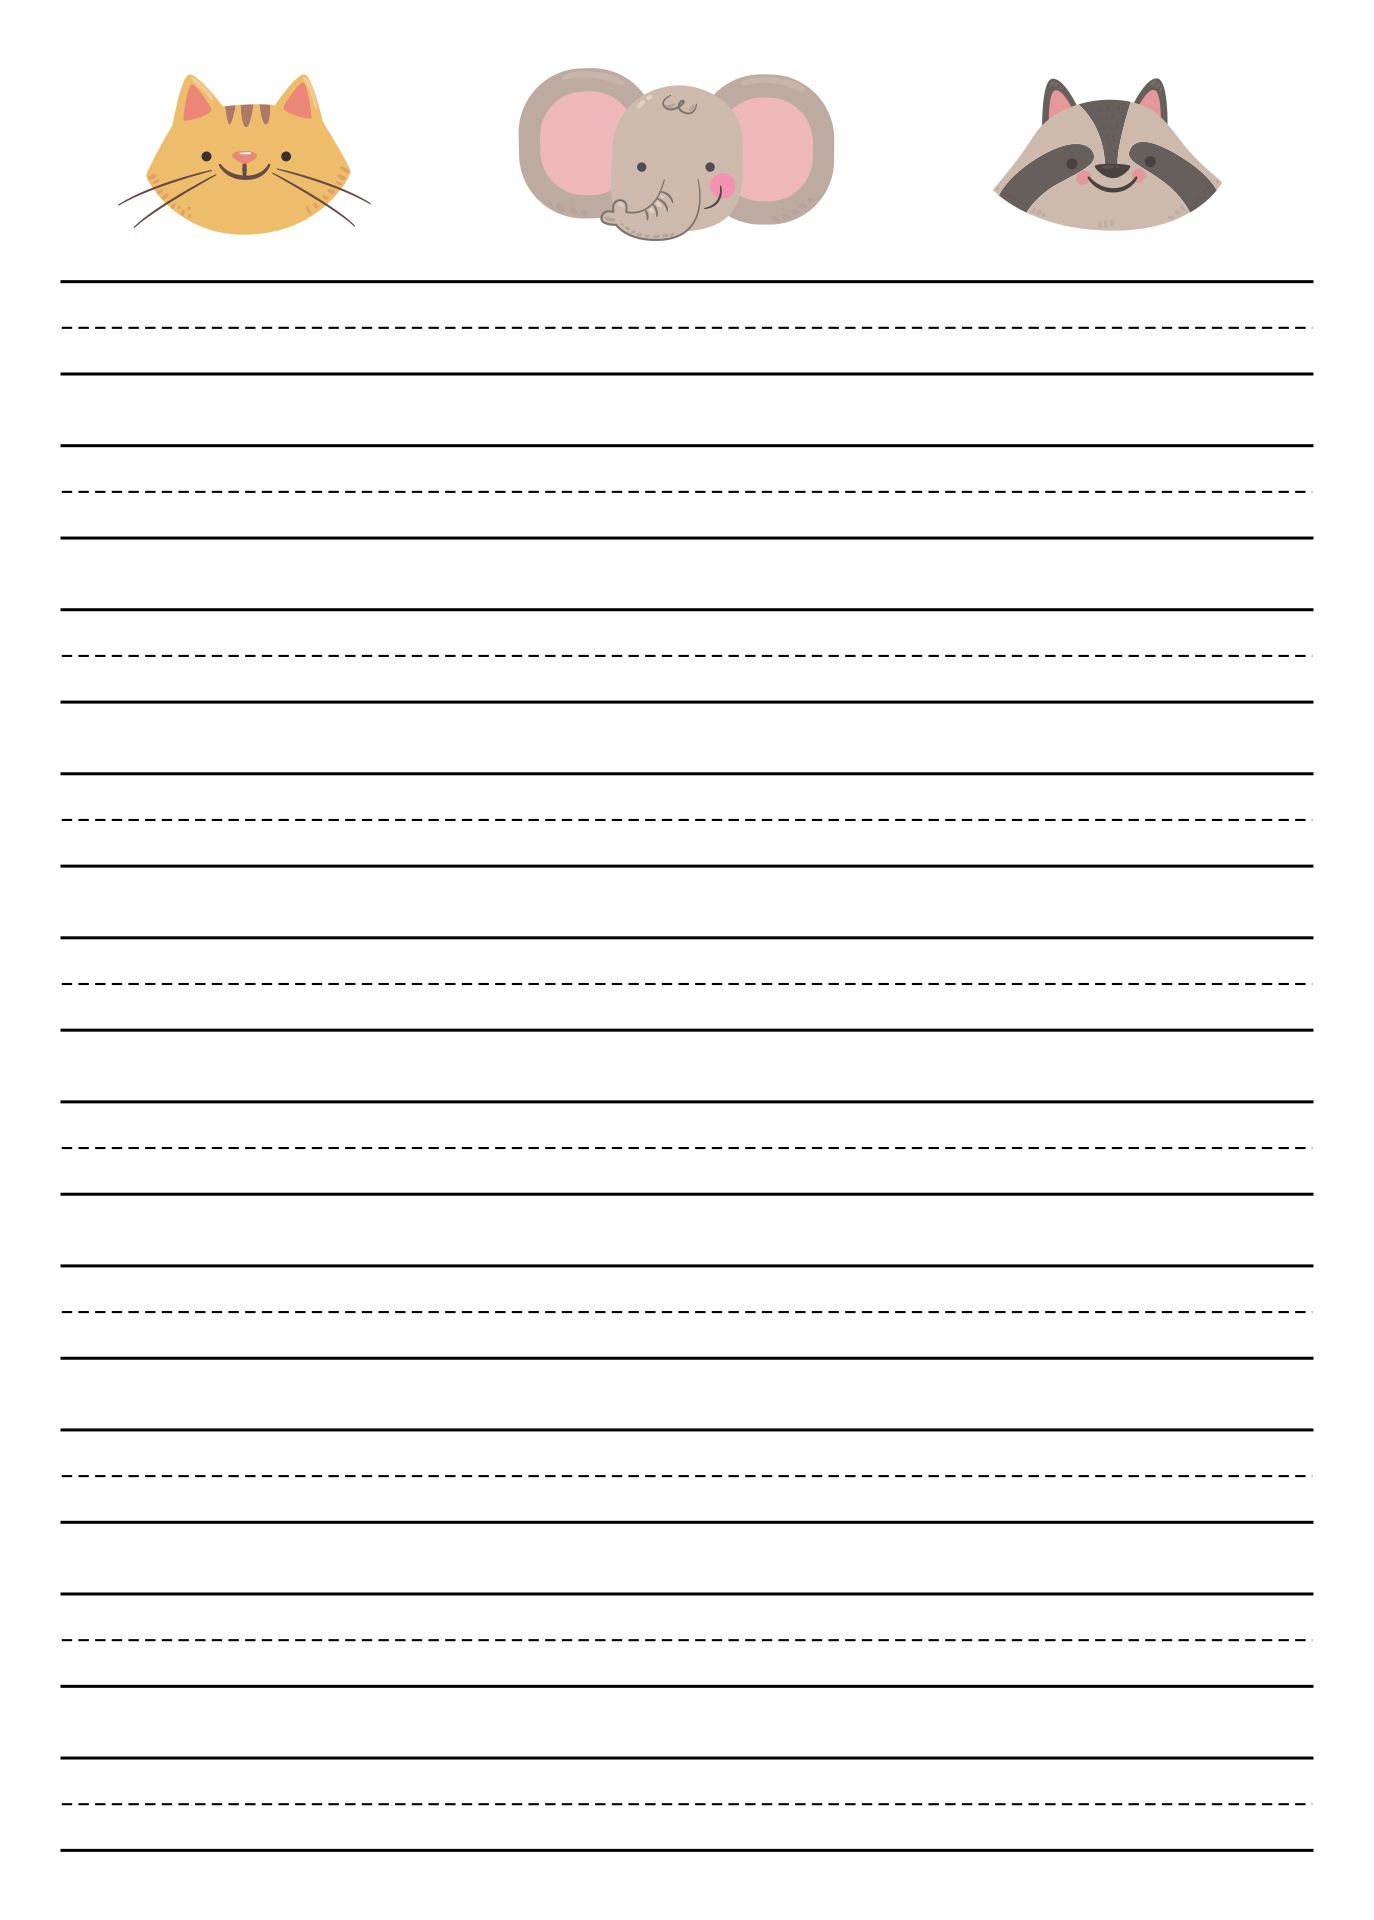 Free online lined writing paper